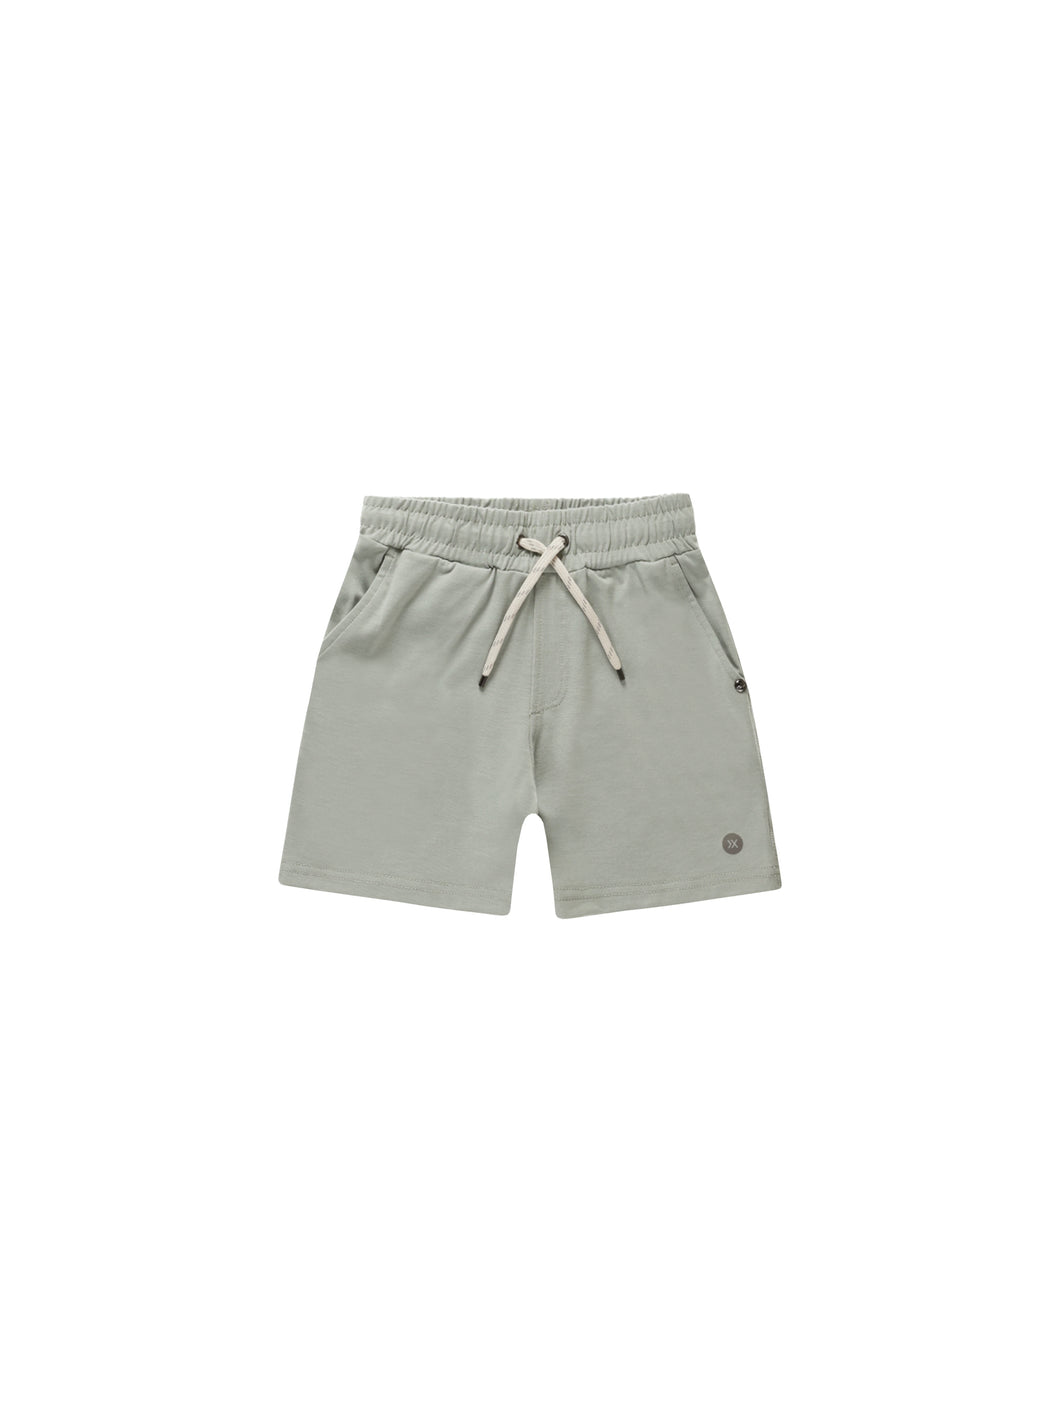 Sweat shorts in a pale teal colour with a drawstring waistband. 